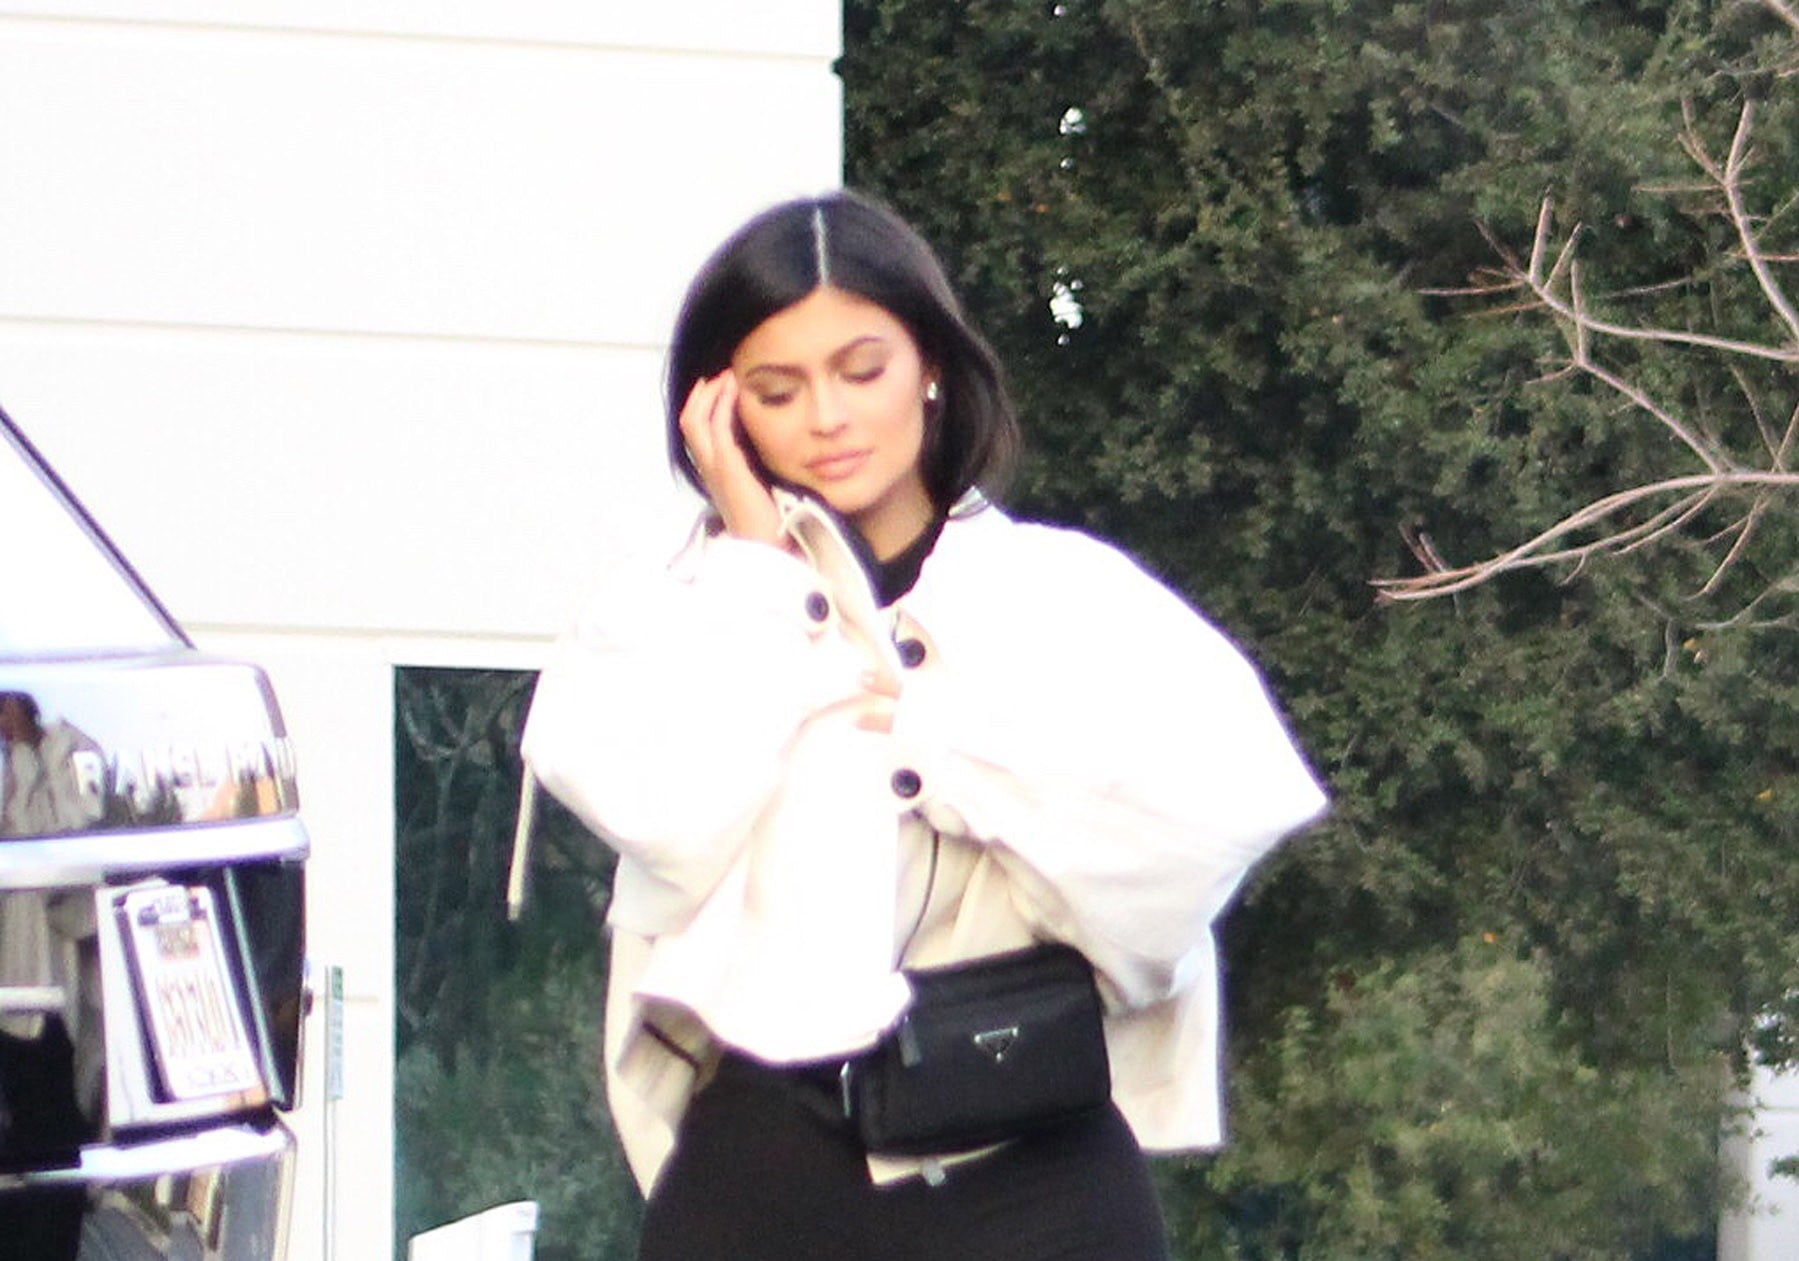 Kylie Jenner Out in LA After Giving Birth February 2018 | POPSUGAR ...